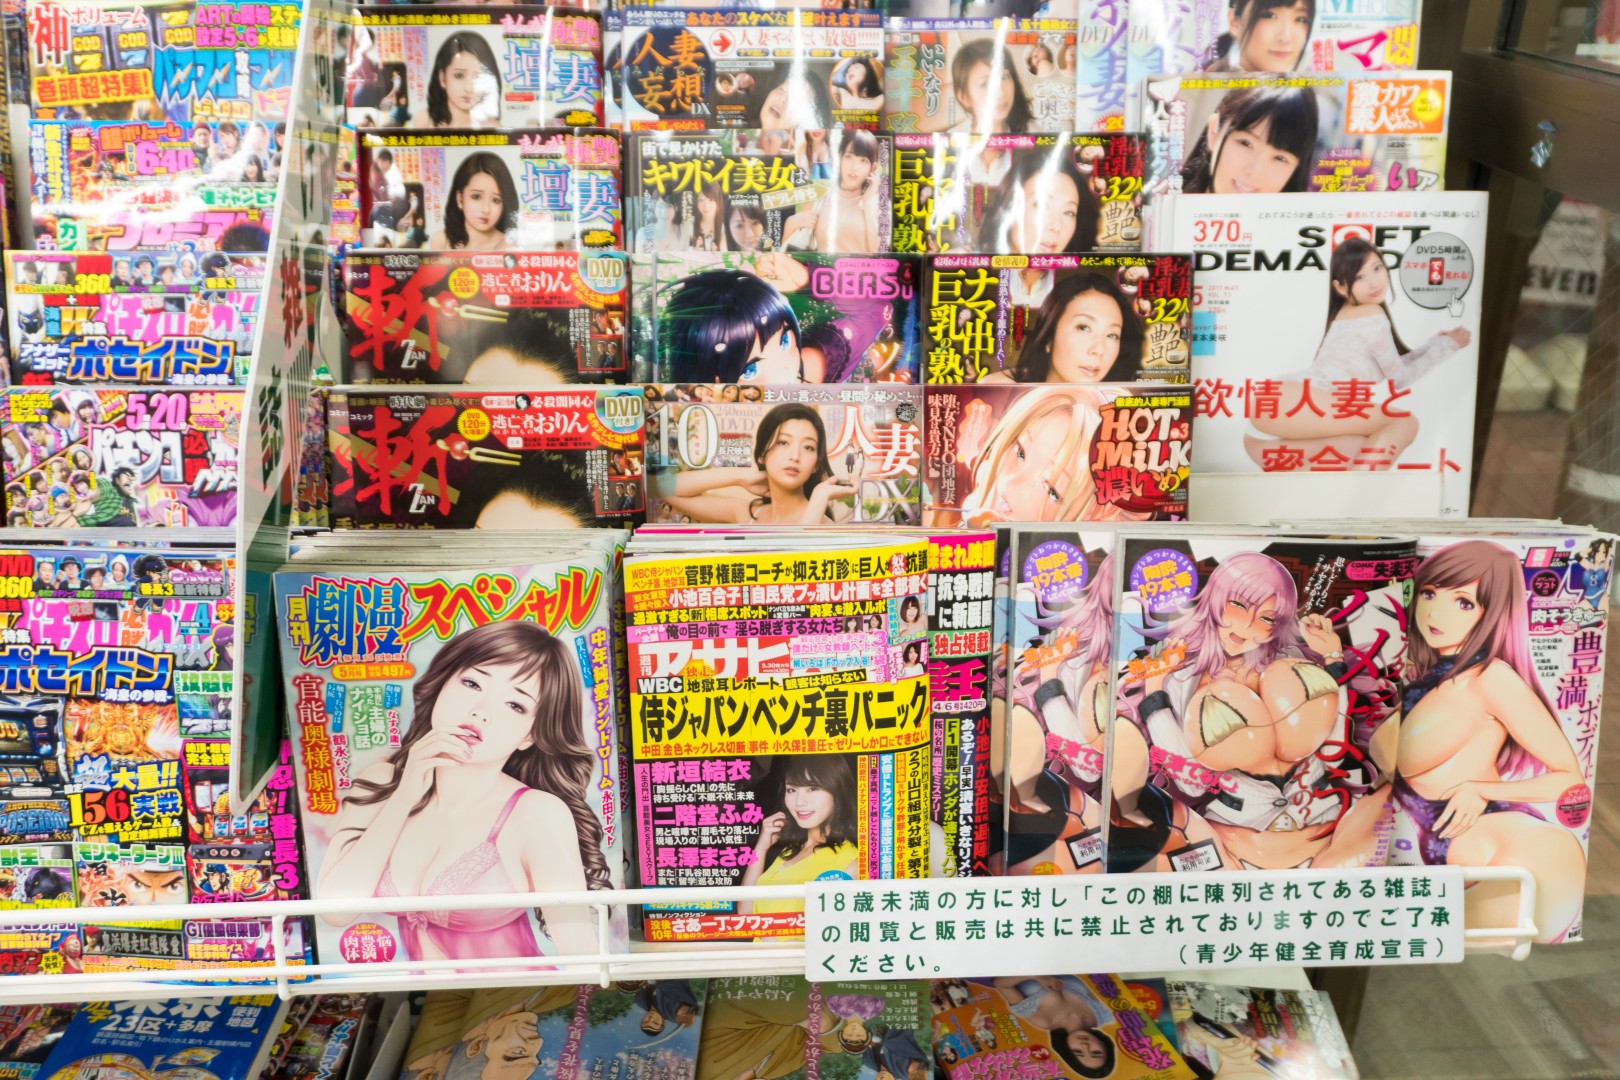 1620px x 1080px - Porn free: Japan to take adult magazines off convenience ...